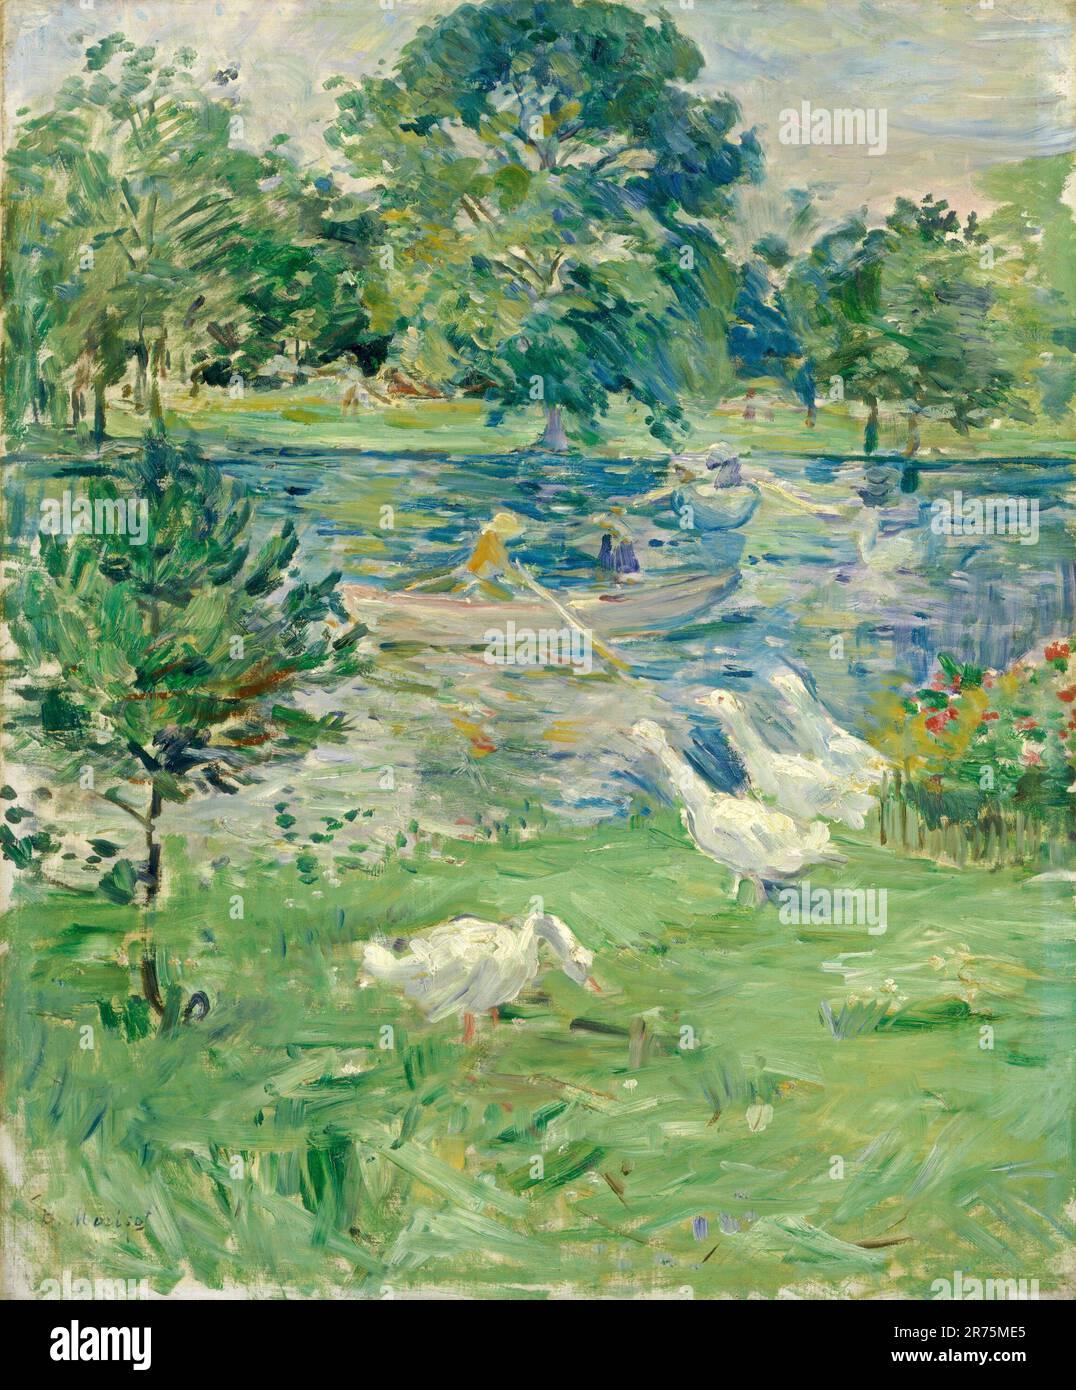 Berthe Morisot  Girl in a Boat with Geese, c. 1889 Stock Photo